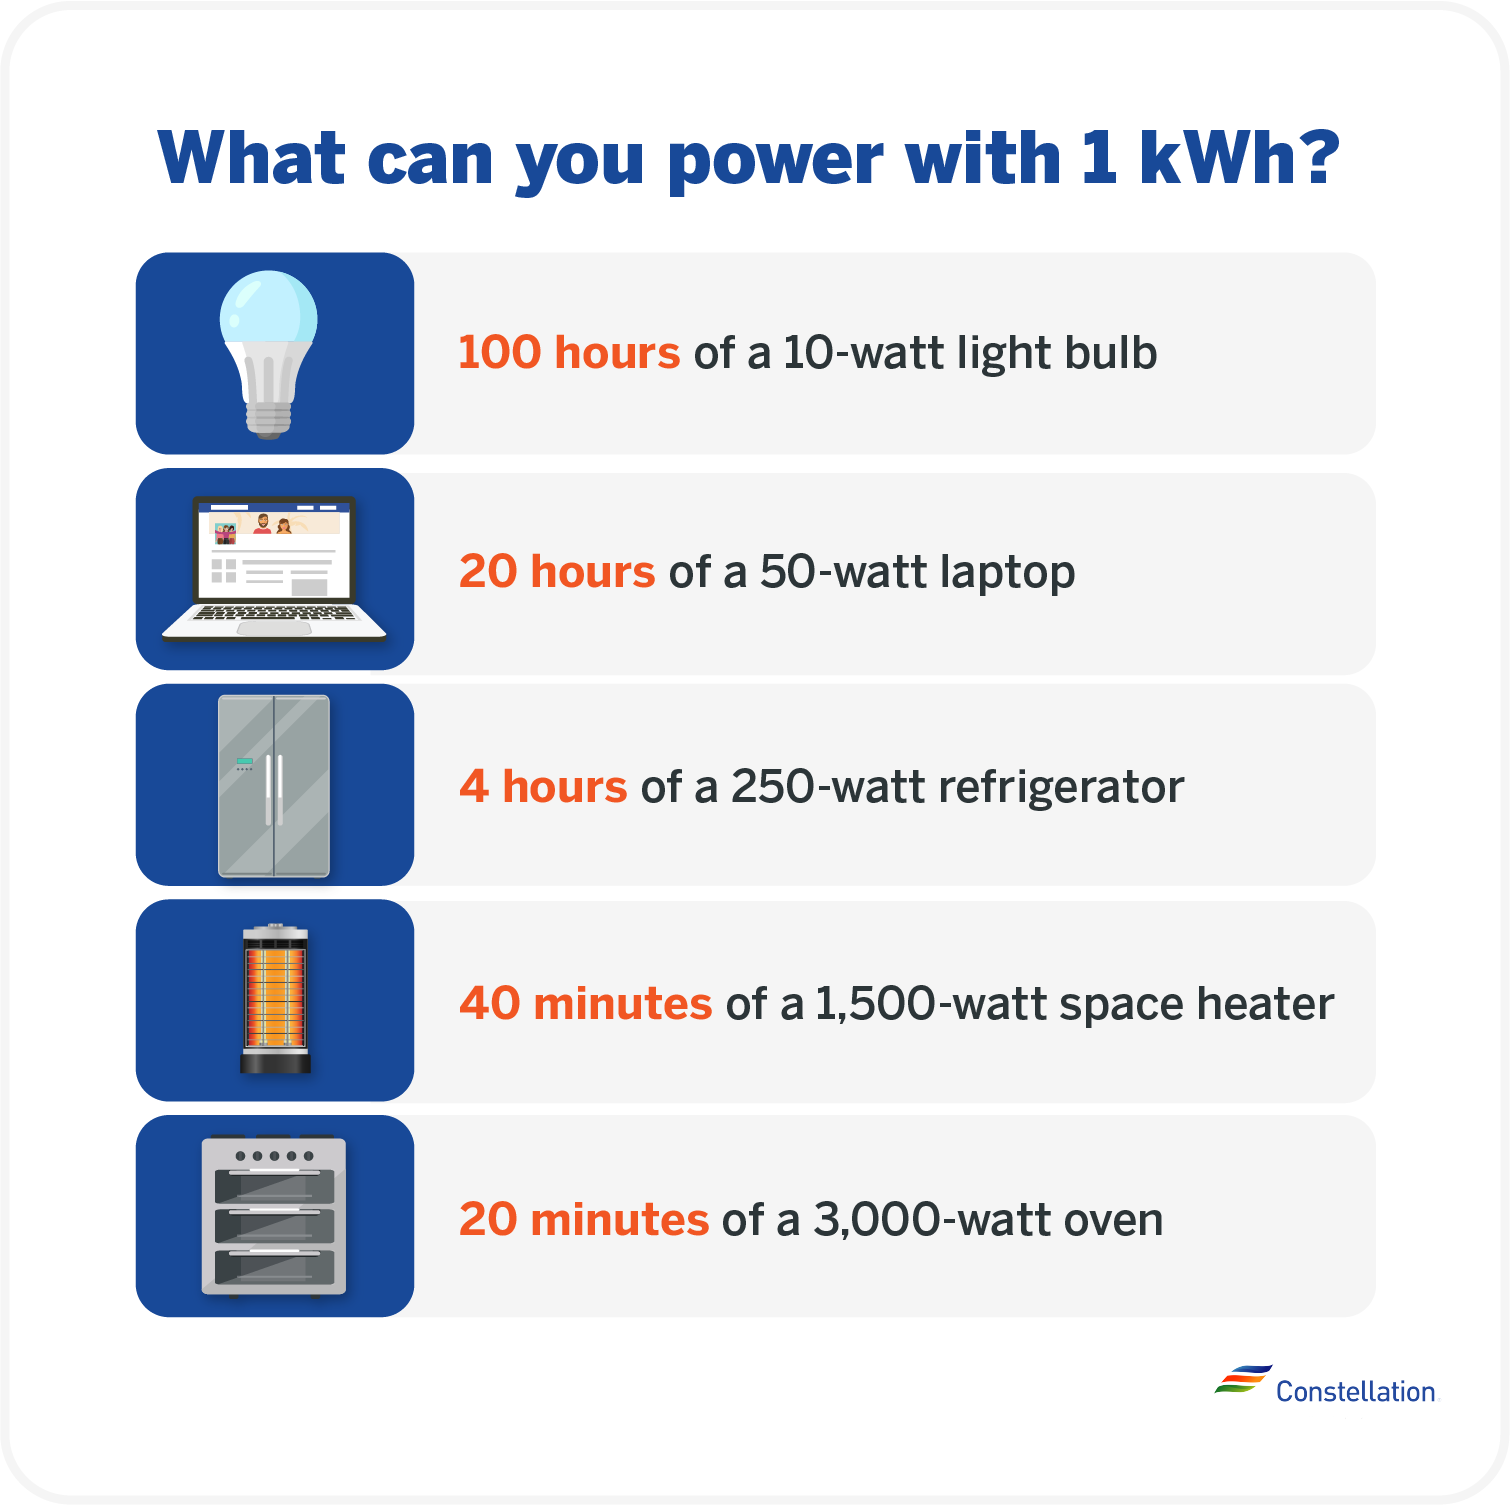 What can you power with 1 kWh?